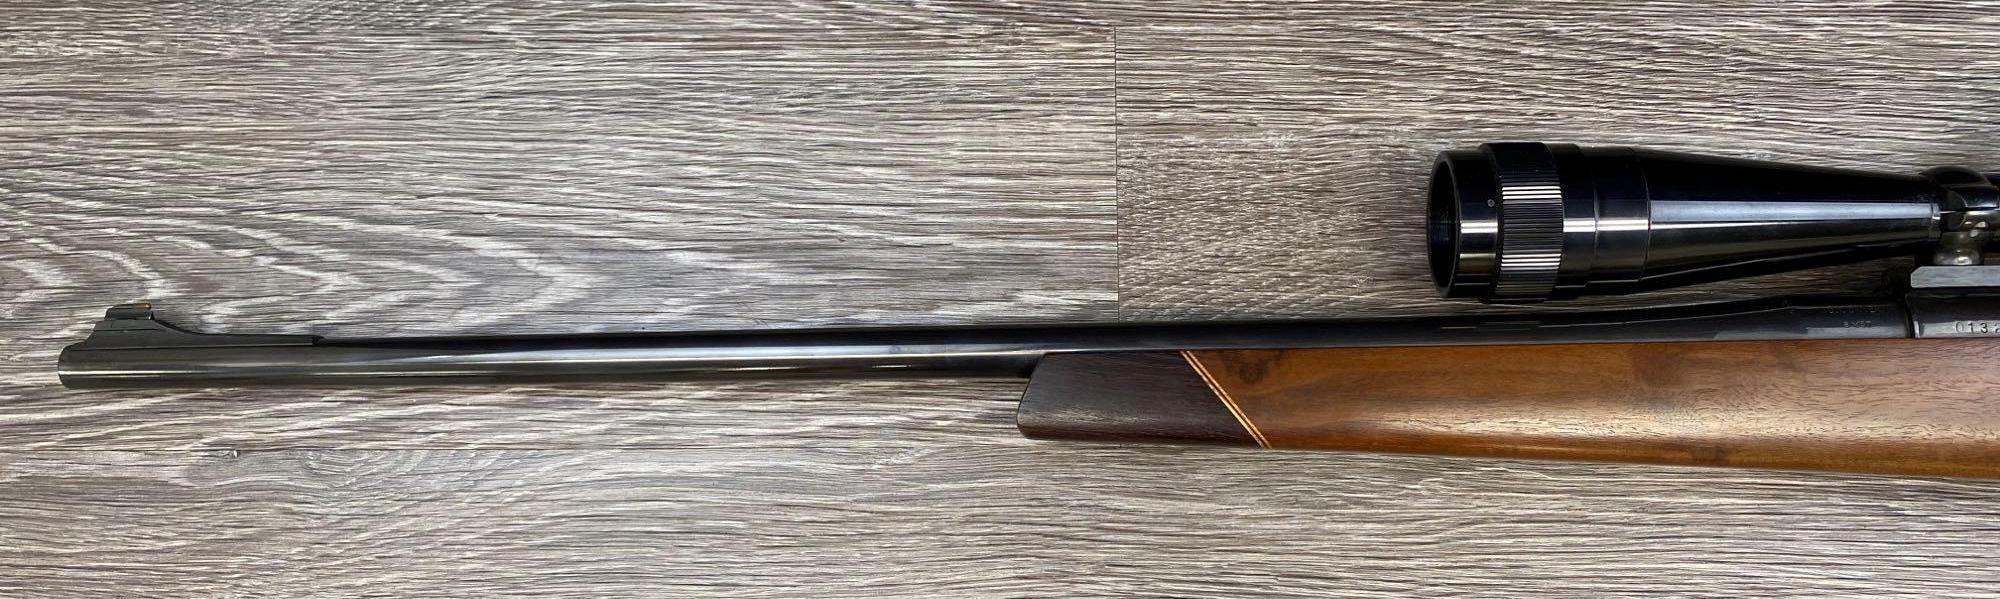 CUSTOM MAUSER BOLT ACTION SPORTING RIFLE 8 x 57 CAL W/SCOPE